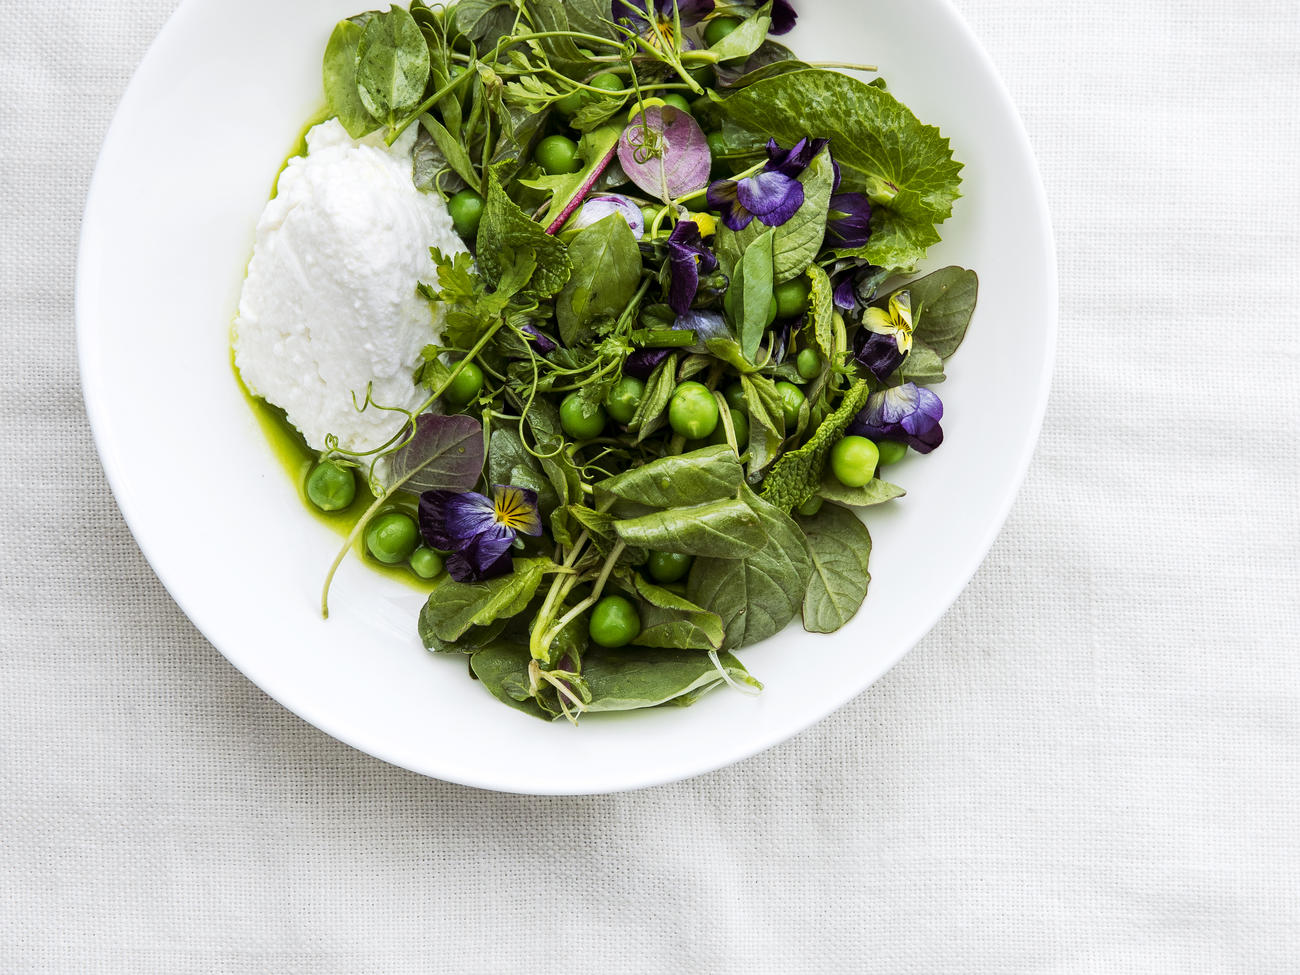 10 Salad Recipes That Put the Taste of Spring Right Onto Your Plate